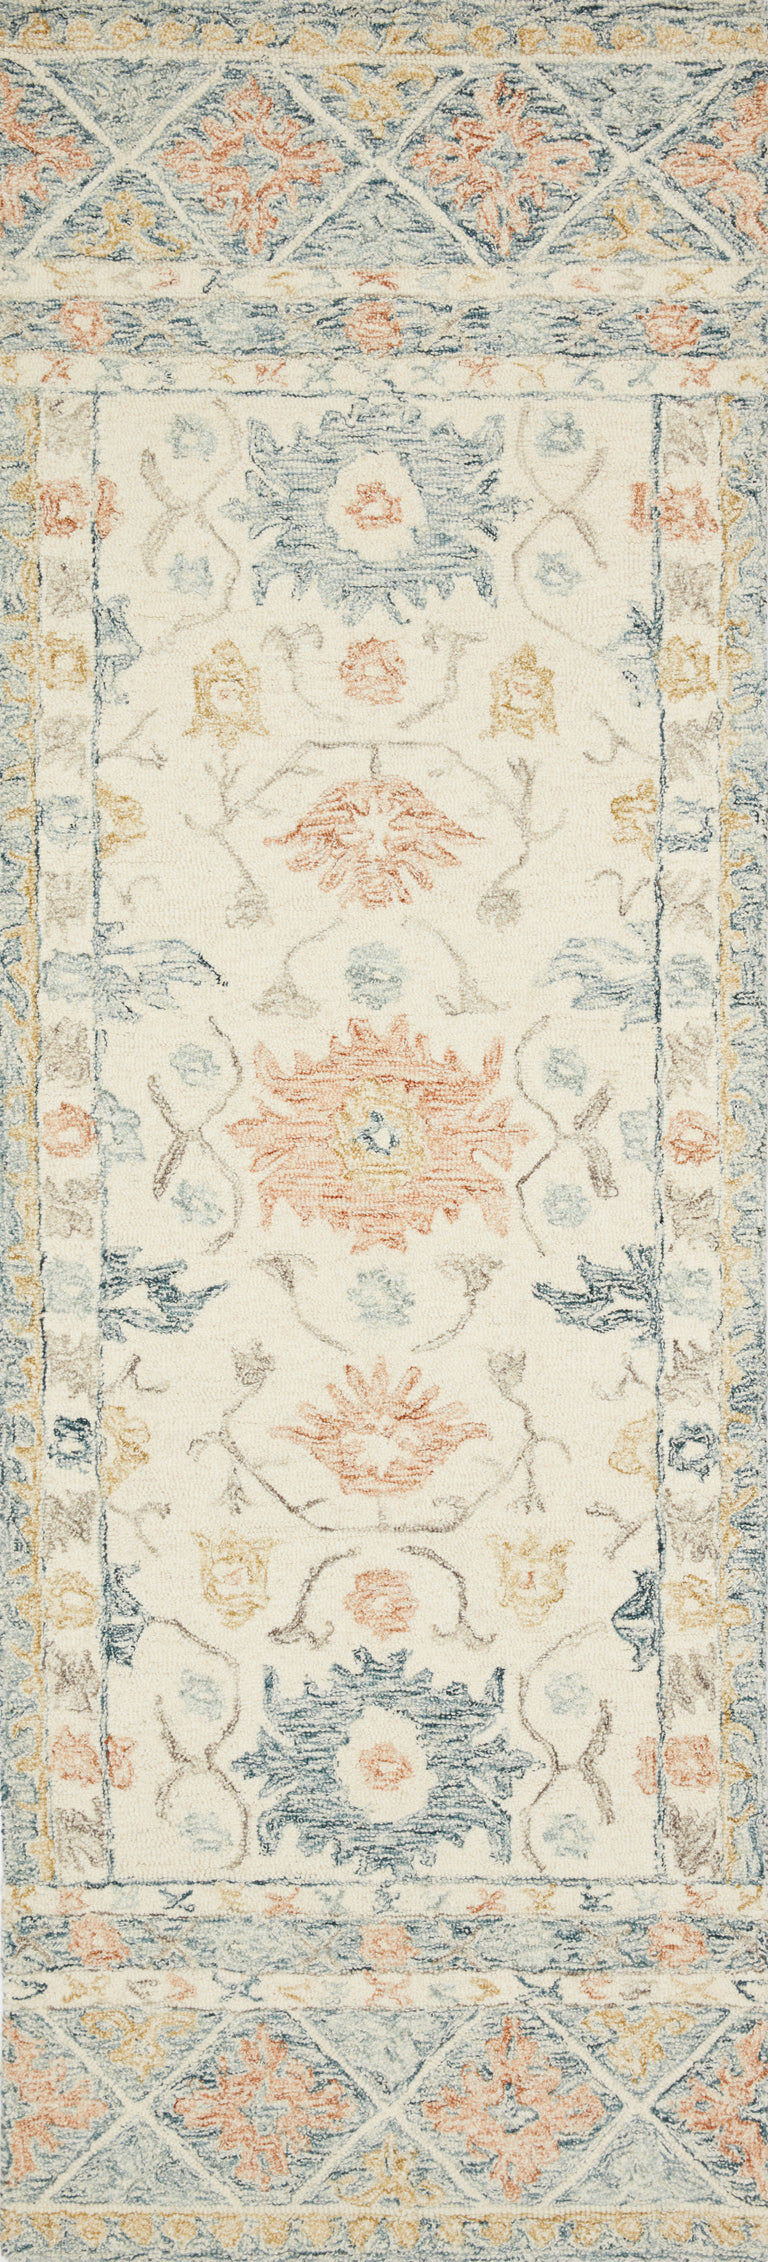 Loloi Rugs Norabel Collection Rug in Ivory, Multi - 8'6" x 12'